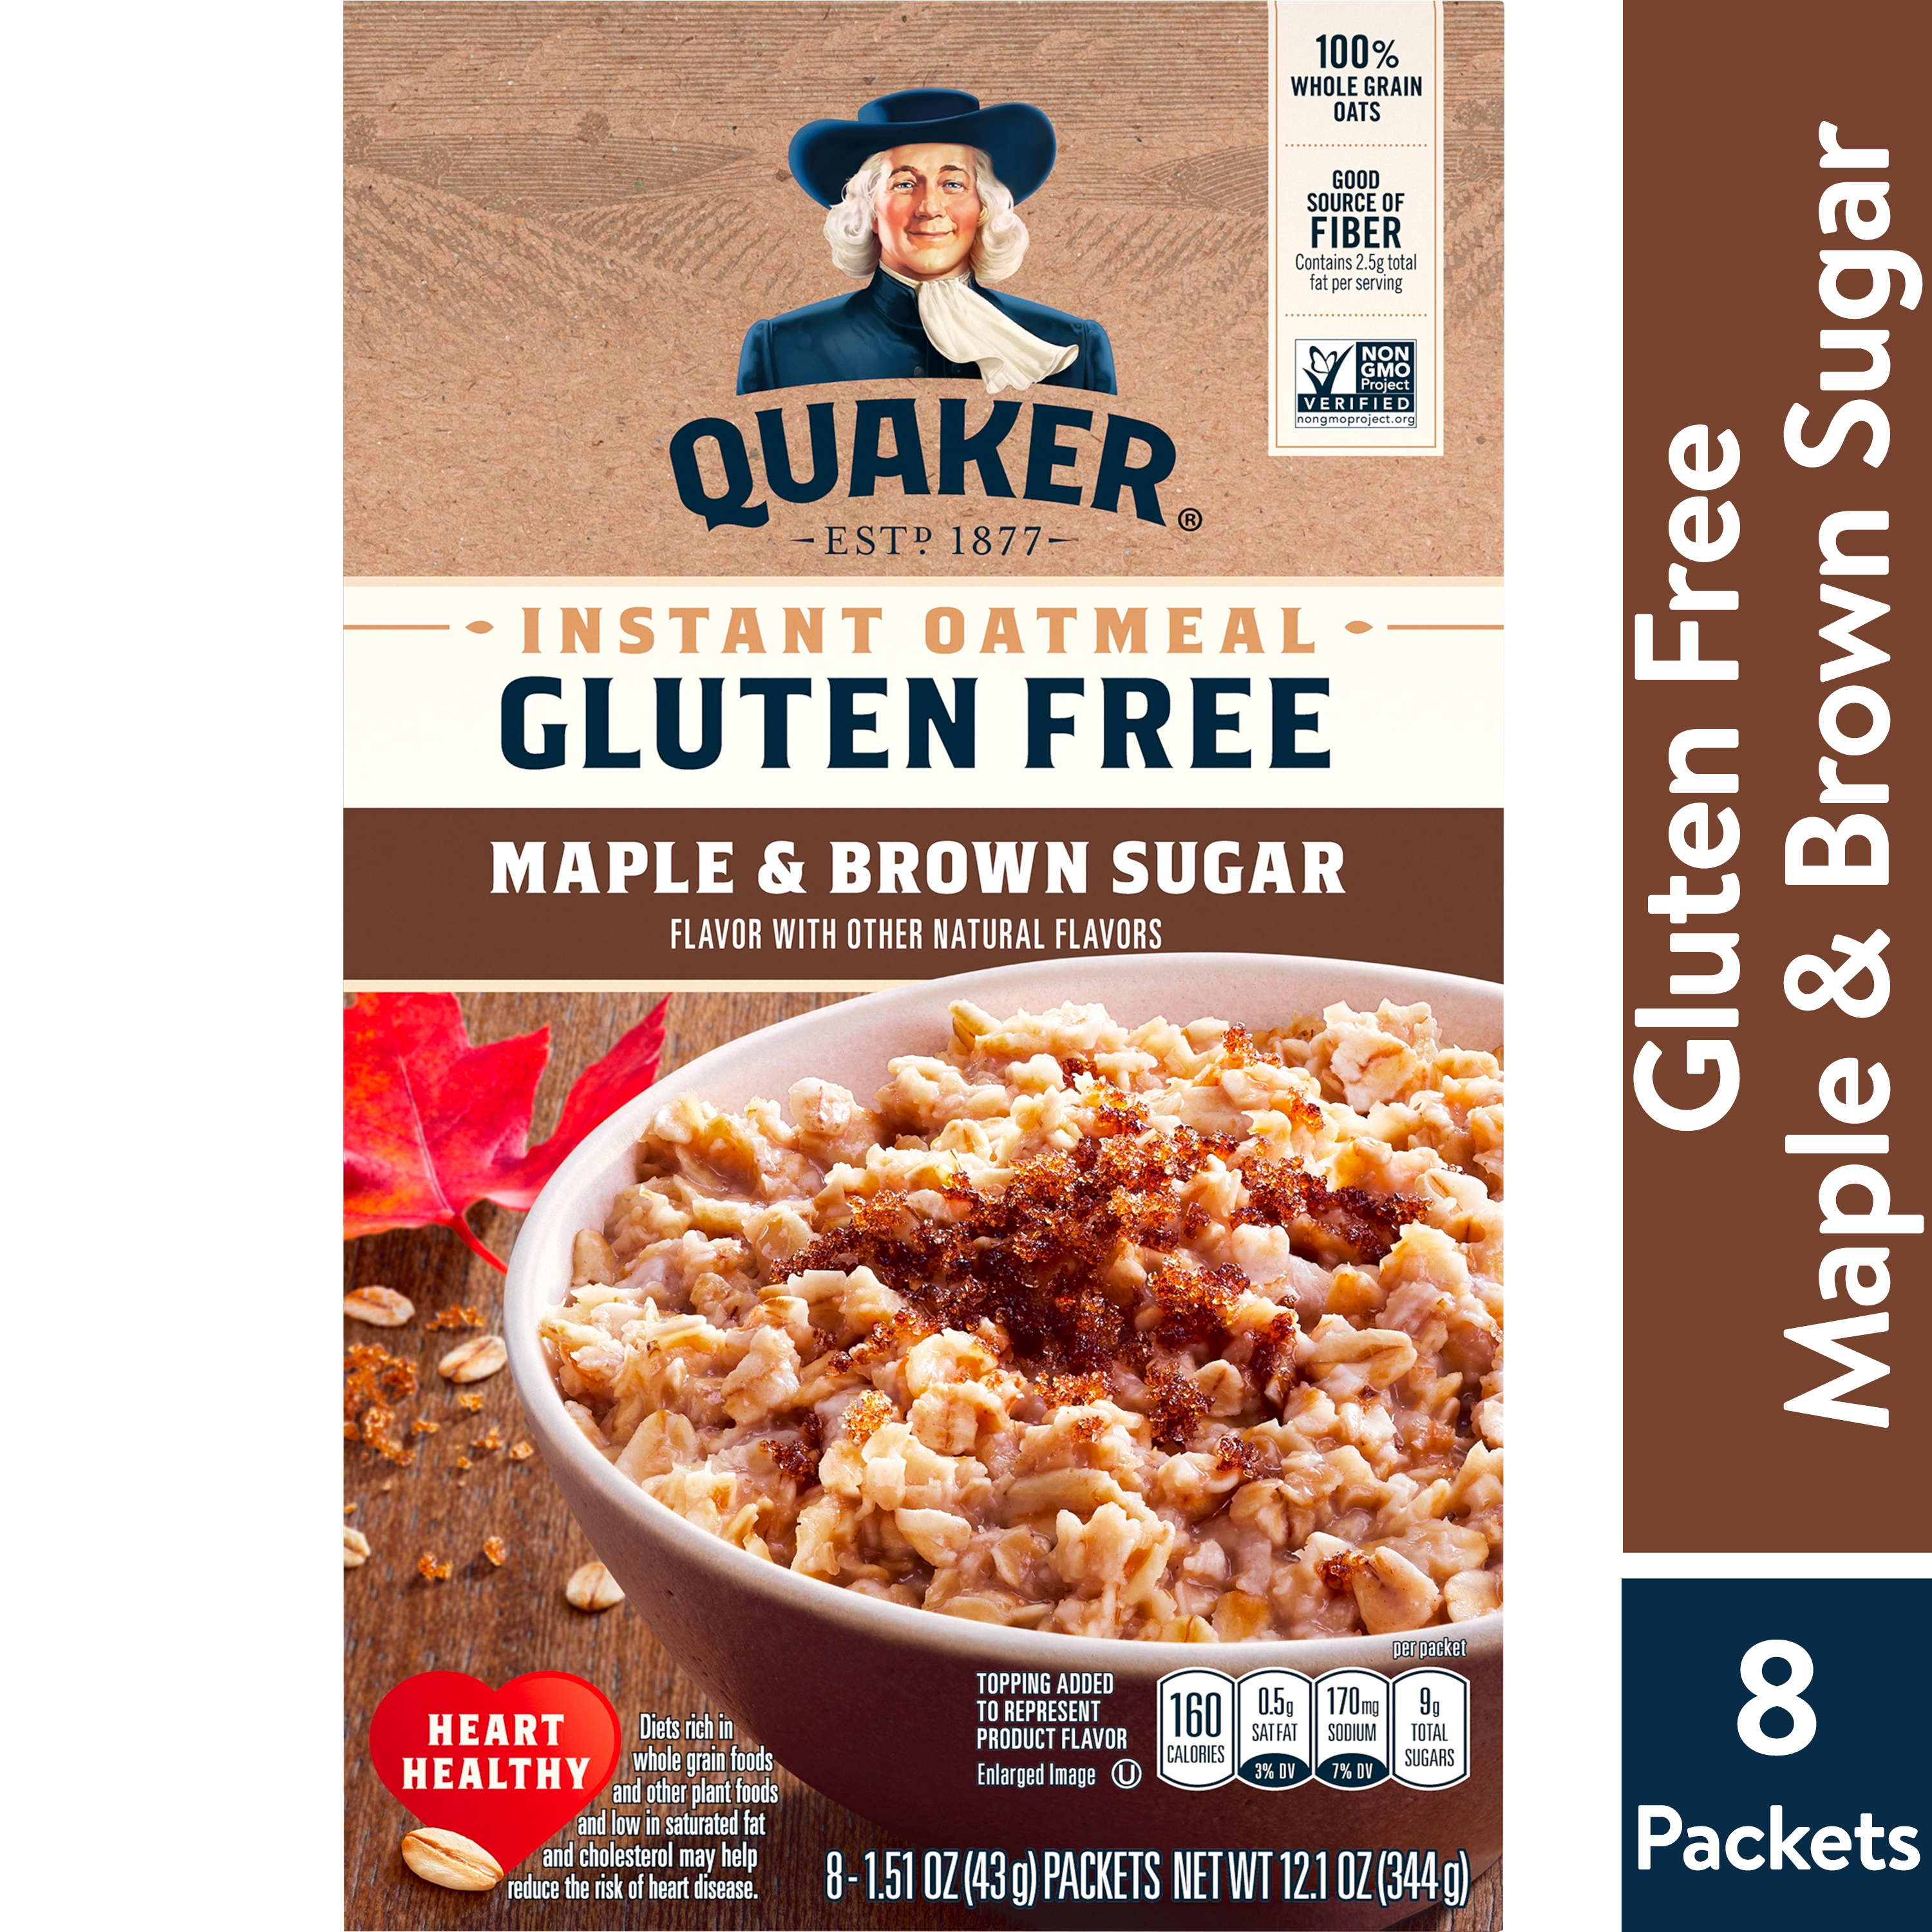 Quaker, Instant Oatmeal, Gluten Free, Maple & Brown Sugar, 1.51 oz, 8 Packets - image 1 of 13